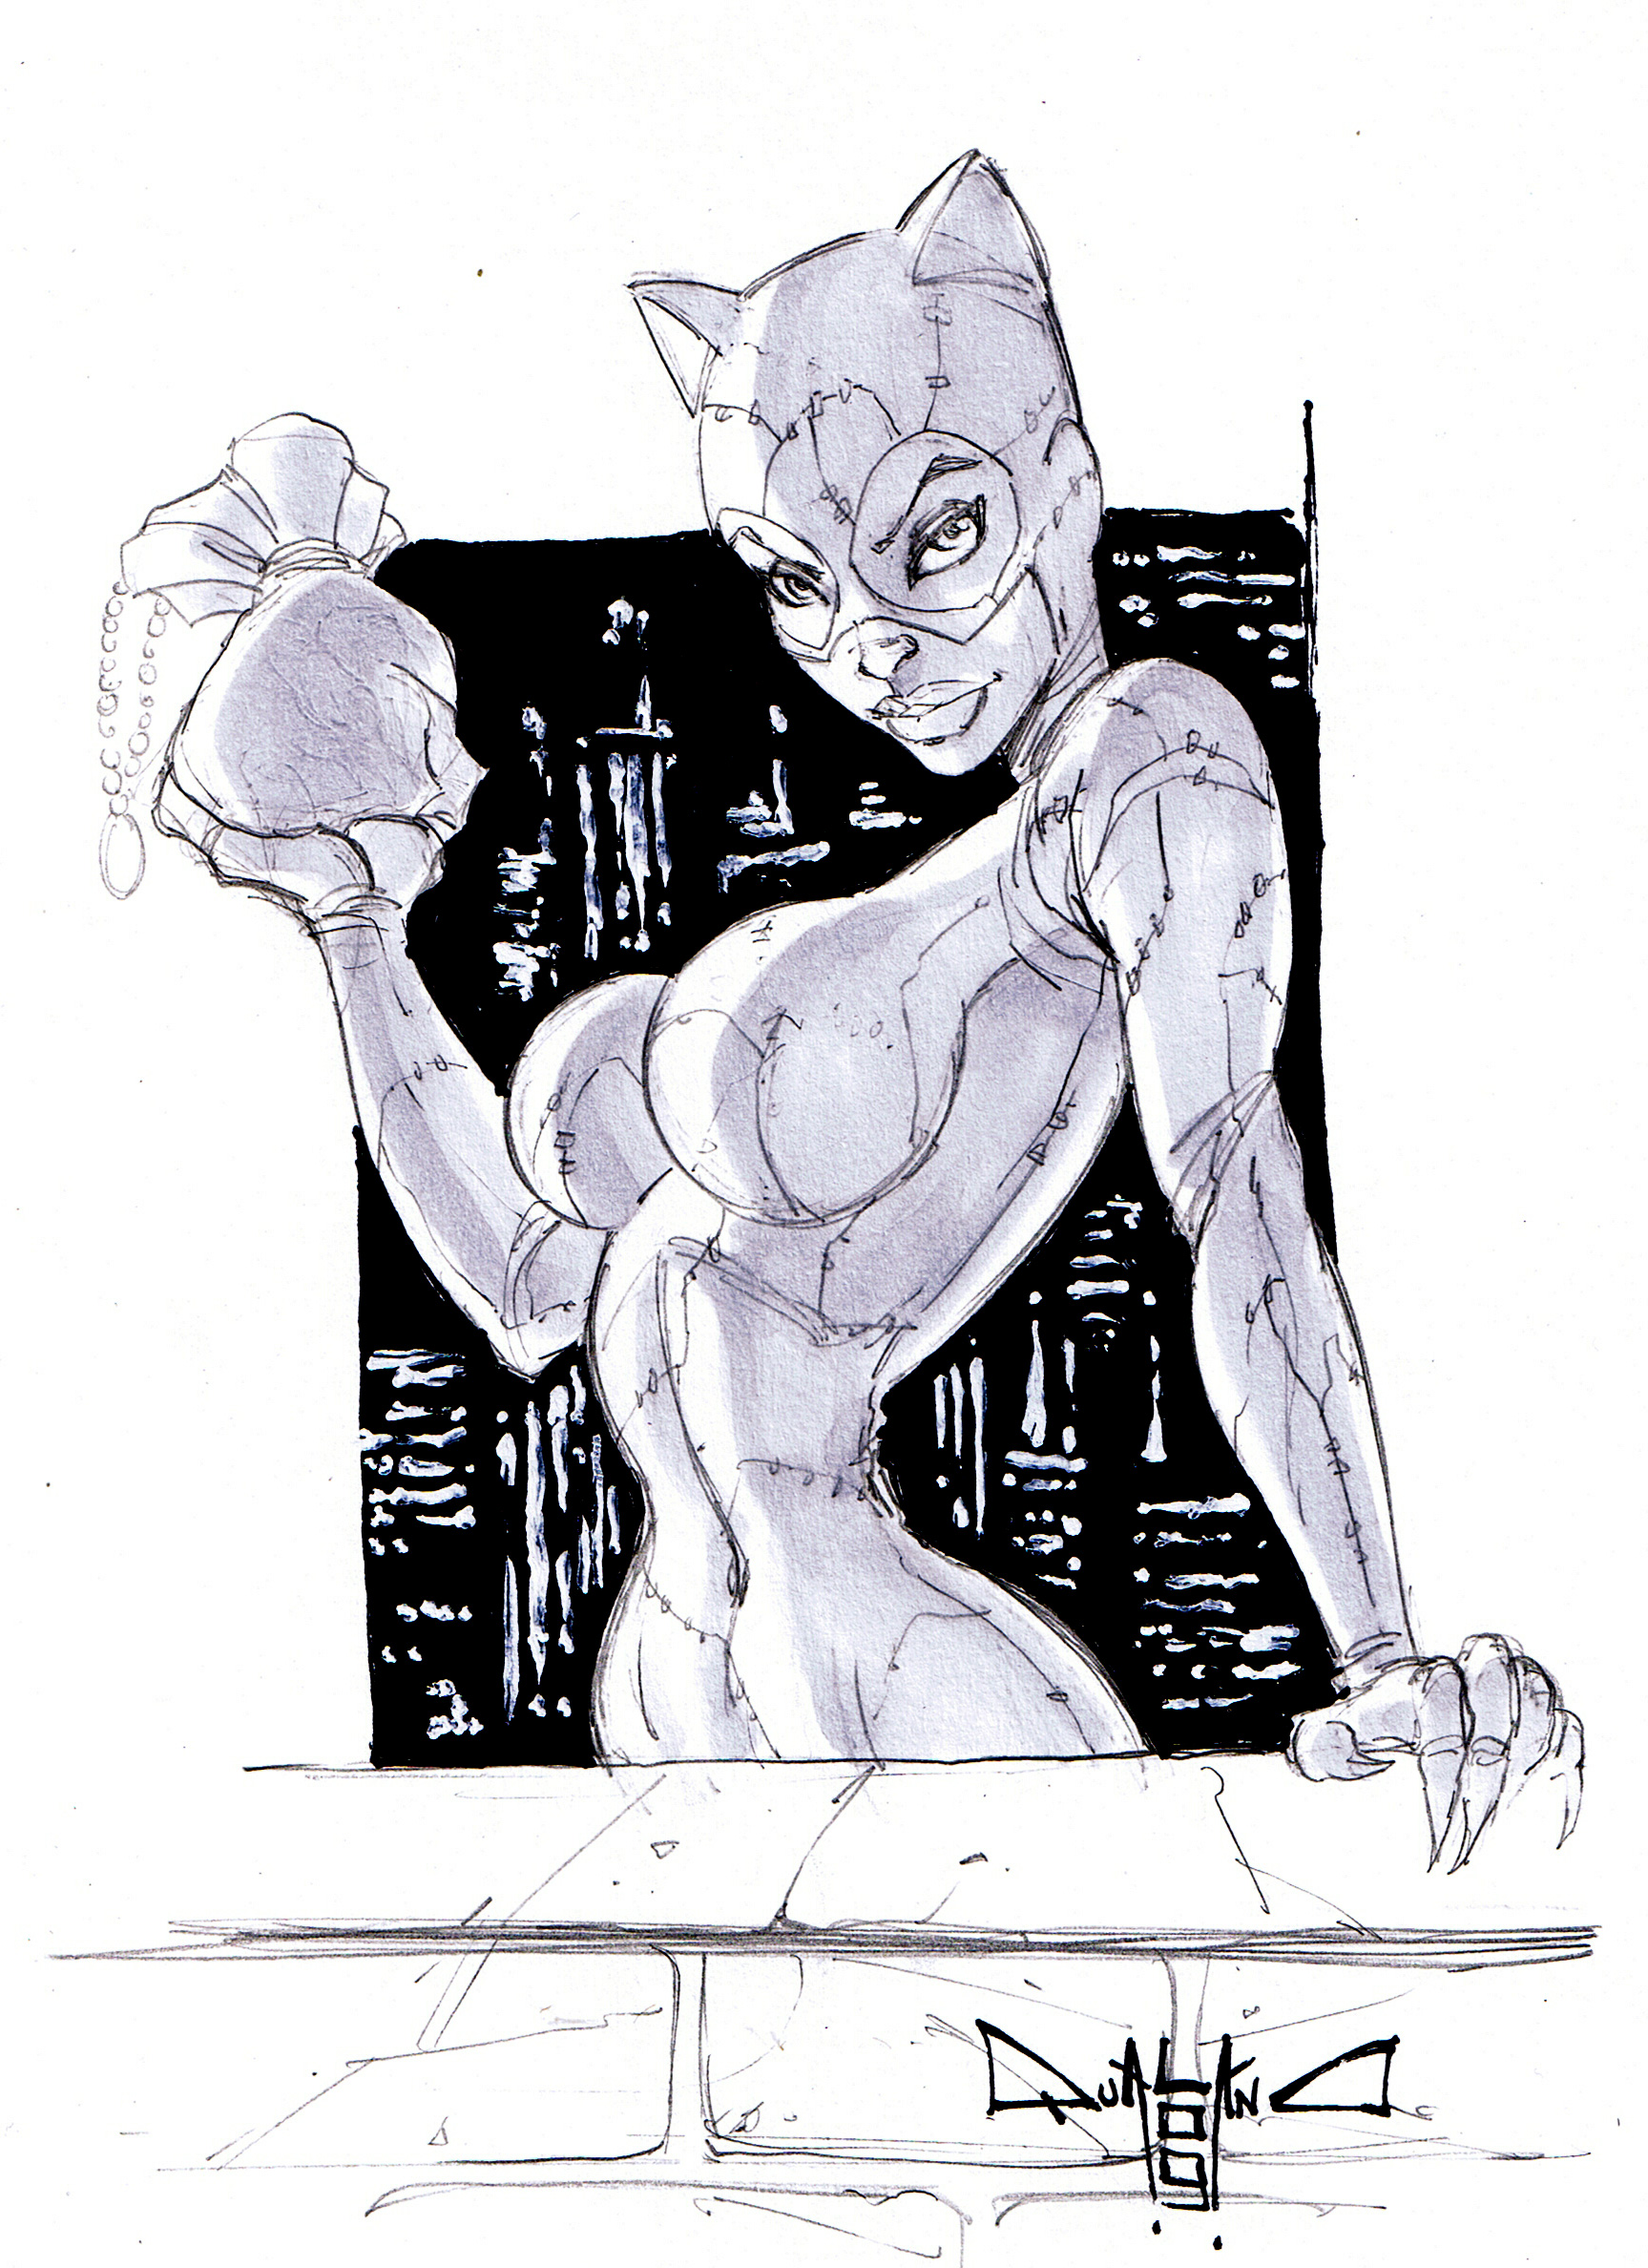 catwoman_sketch_by_qualano.jpg